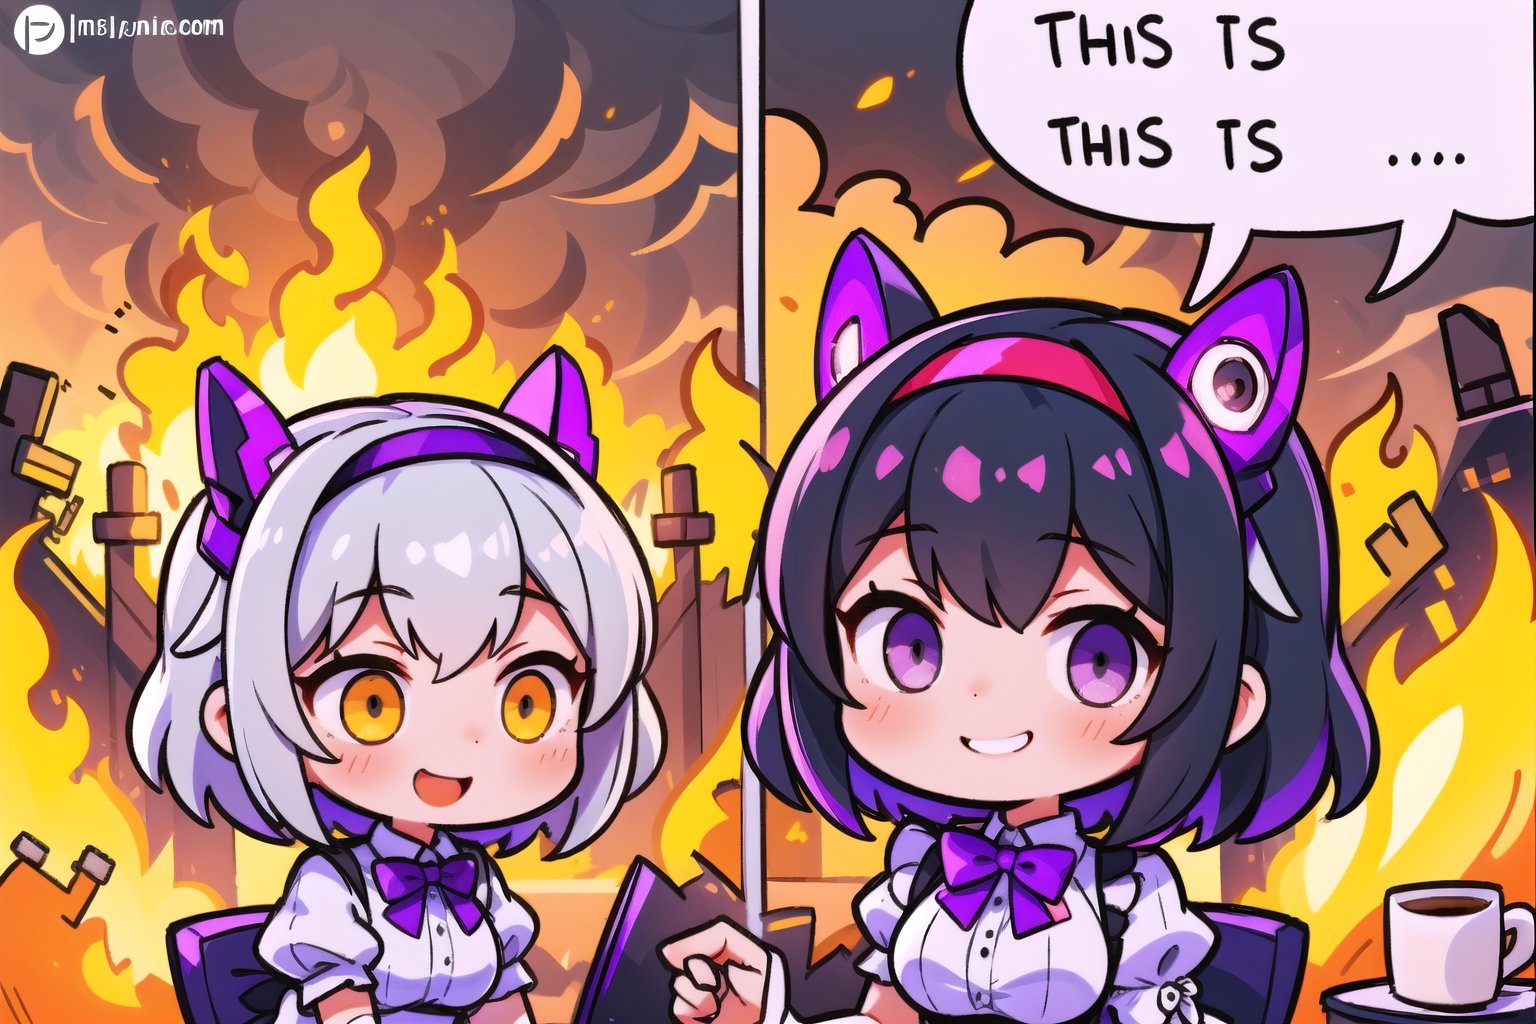 (masterpiece), highly detailed, high quality, perfect lighting, beautiful, 2girls, black hair, yellow eyes, silver hair color, medium hair, multicolored hair, purple eyes, medium breasts, mecha headgear, violet clothes, white shirt, lace, lace rims, purple bowtie, (evil smile), fire, burning, outdoor, DisasterGirlMeme, IncrsDisasterGirlMeme,IncrsDisasterGirlMeme,IncrsThisIsFineMeme, maid